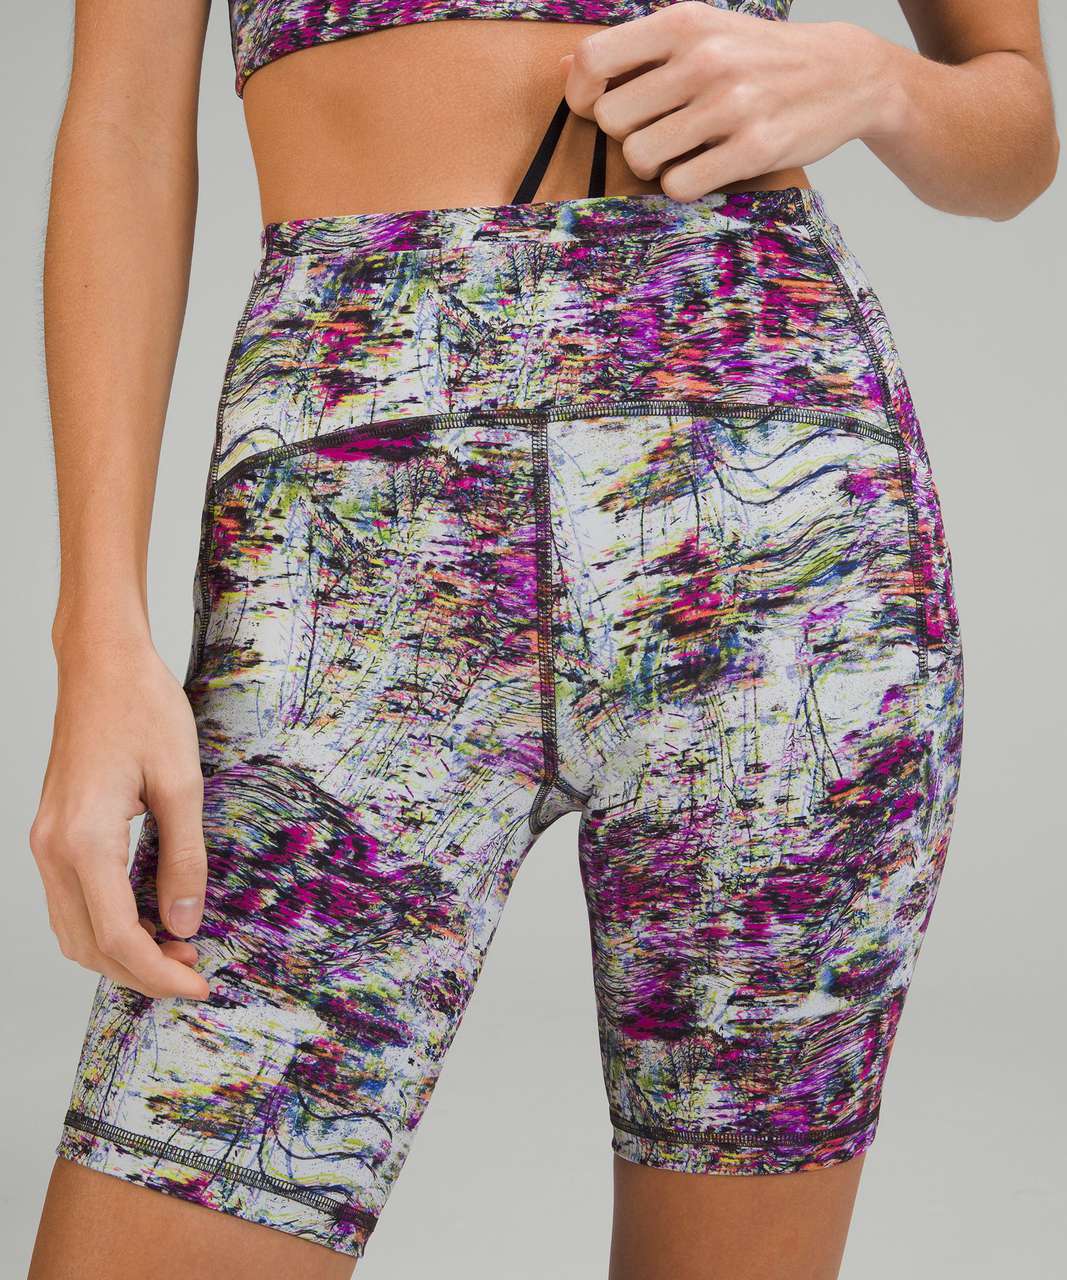 Lululemon HR Swift Speed Shorts 8 NWT Sold out Floral!